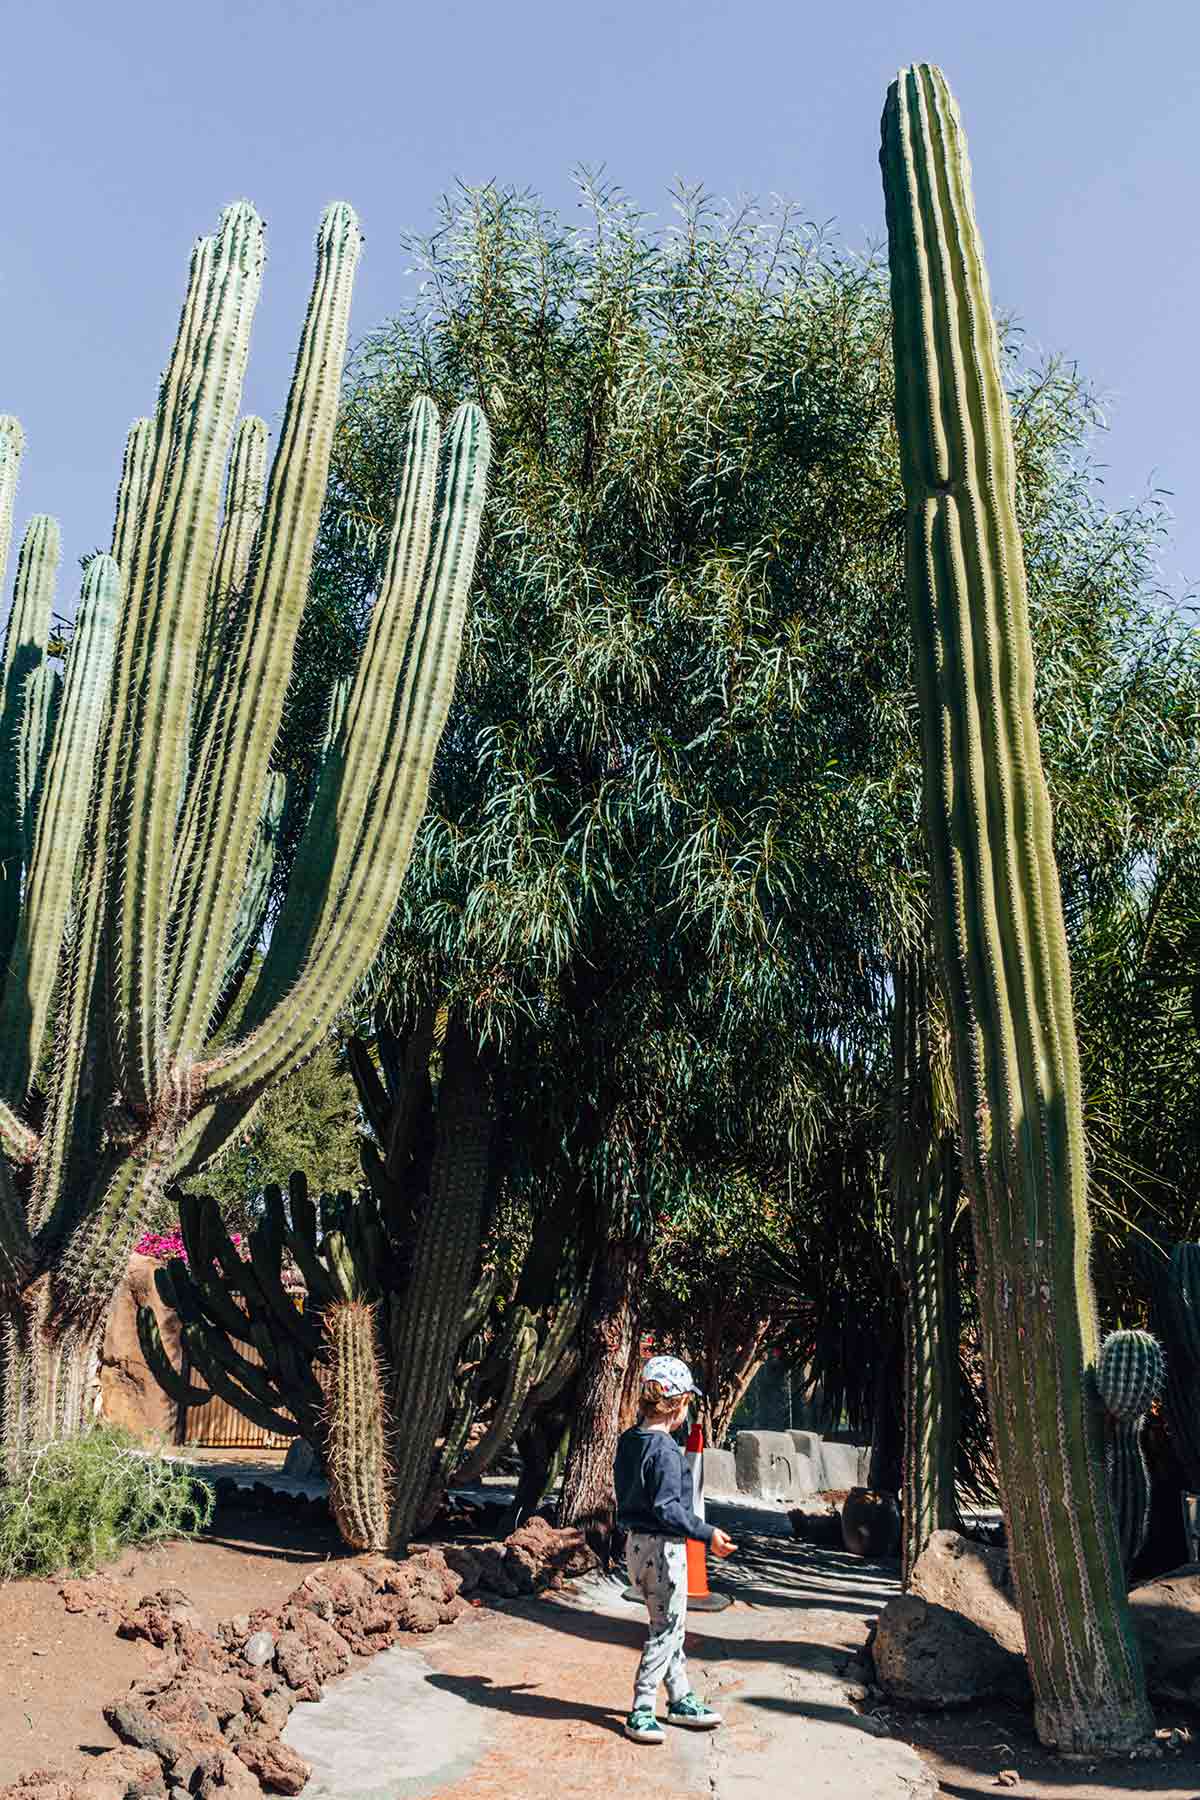 A child standing near giant cactus